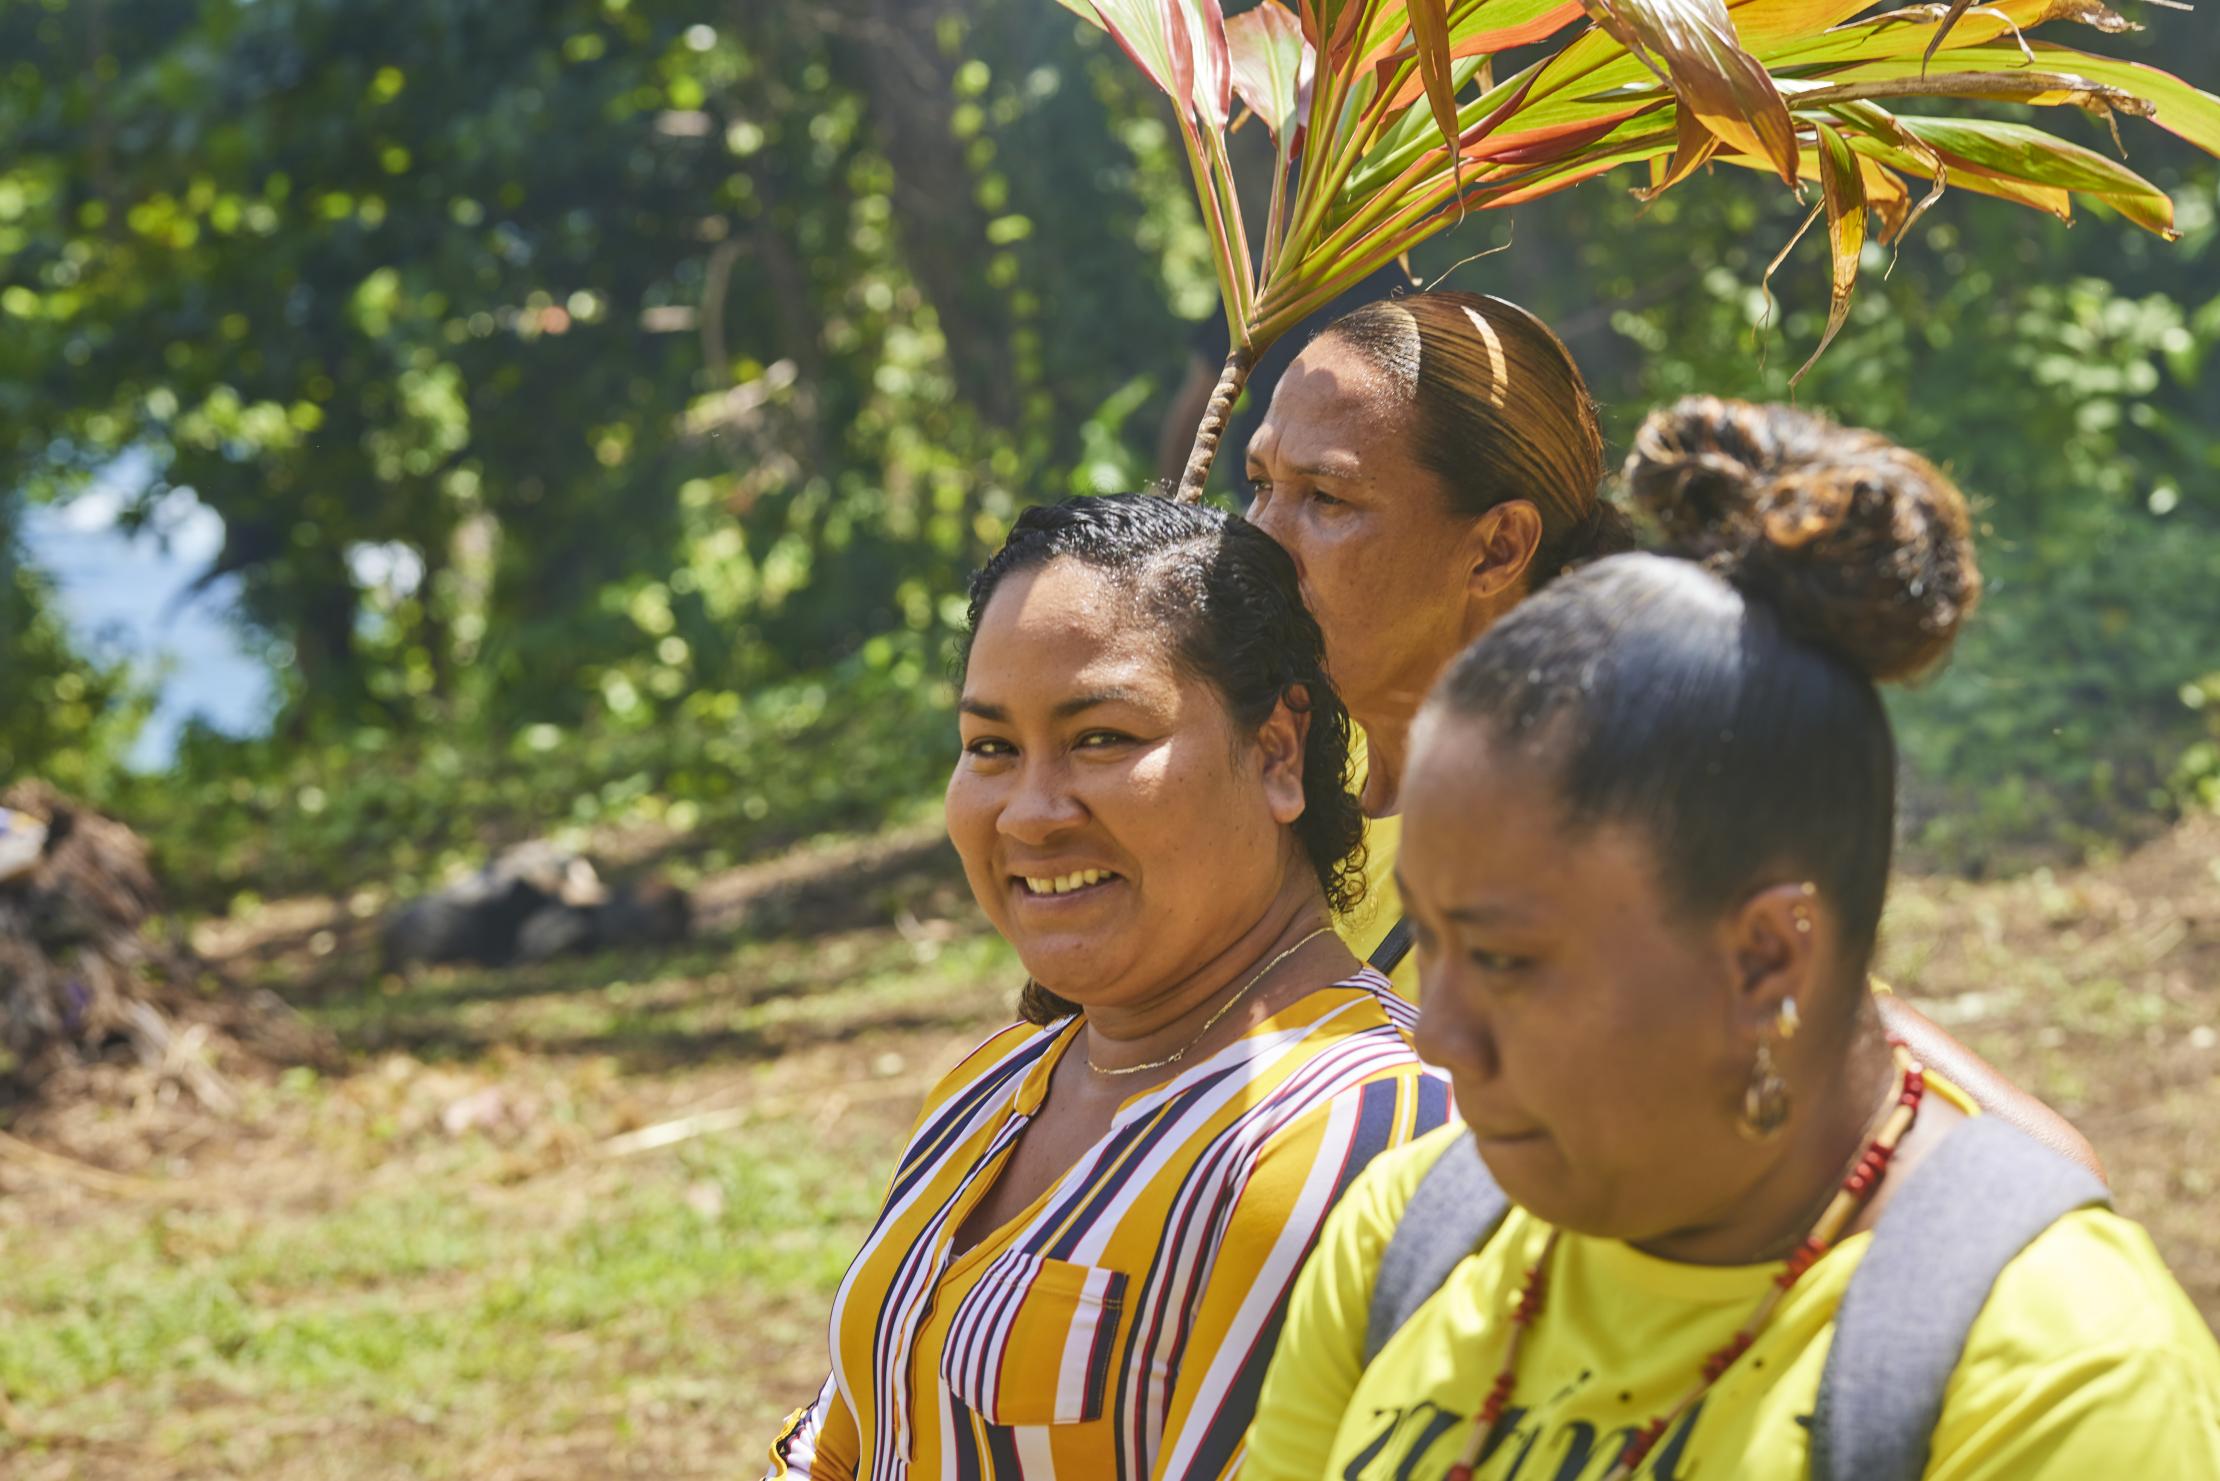 Women of the Kalinago indigenous community in Dominica